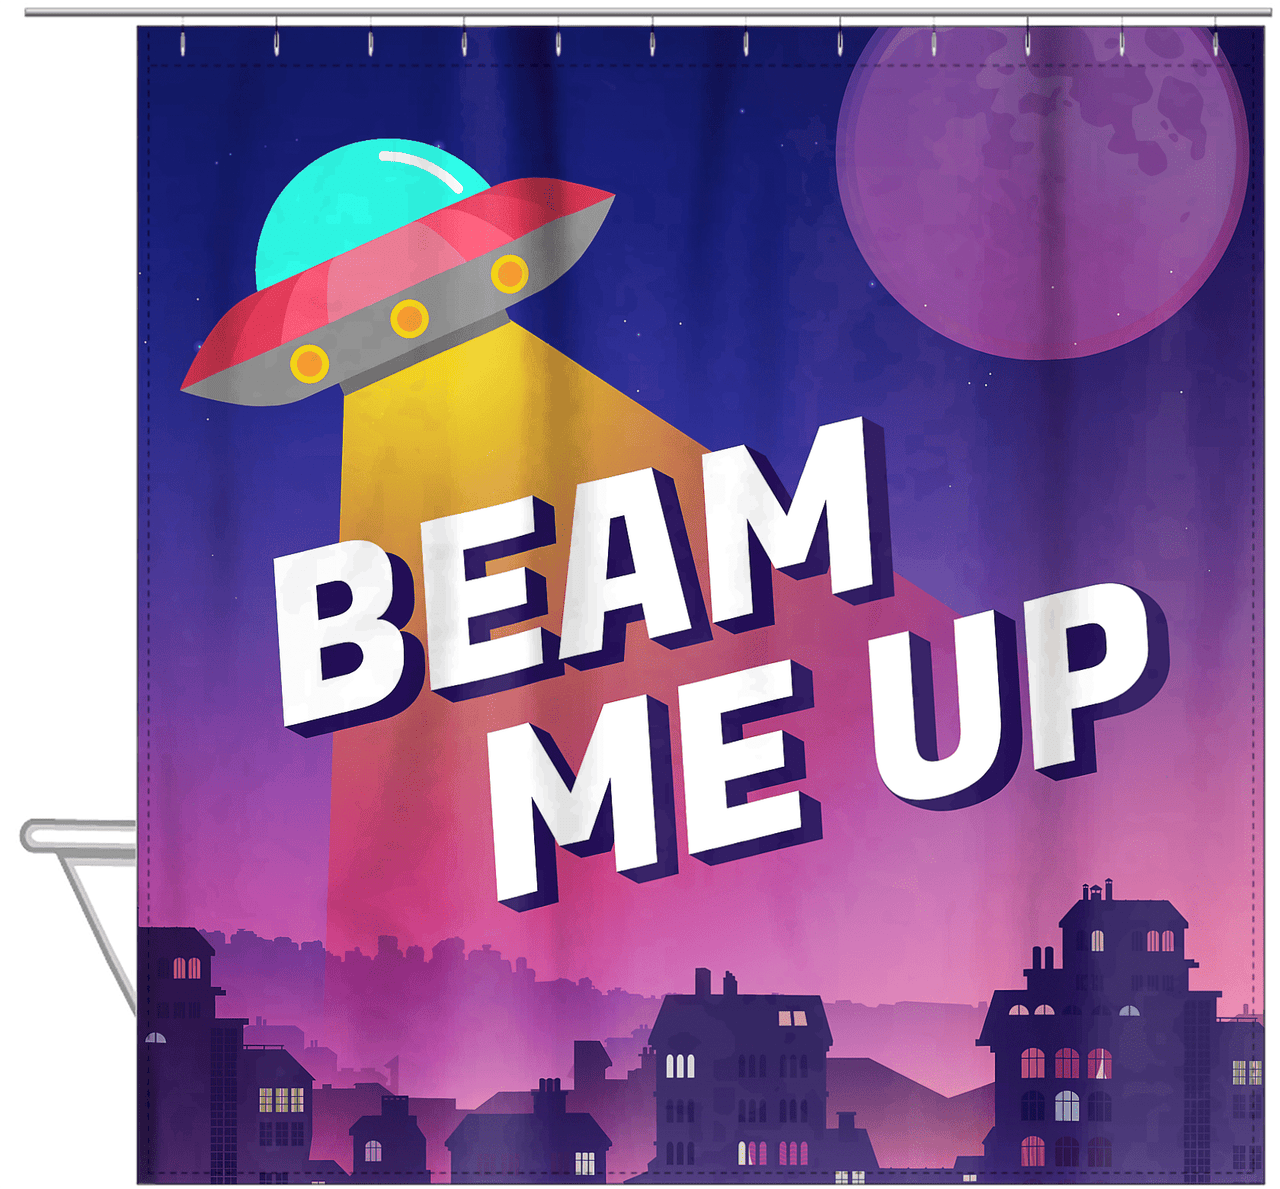 Aliens / UFO Shower Curtain - Beam Me Up - Hanging View